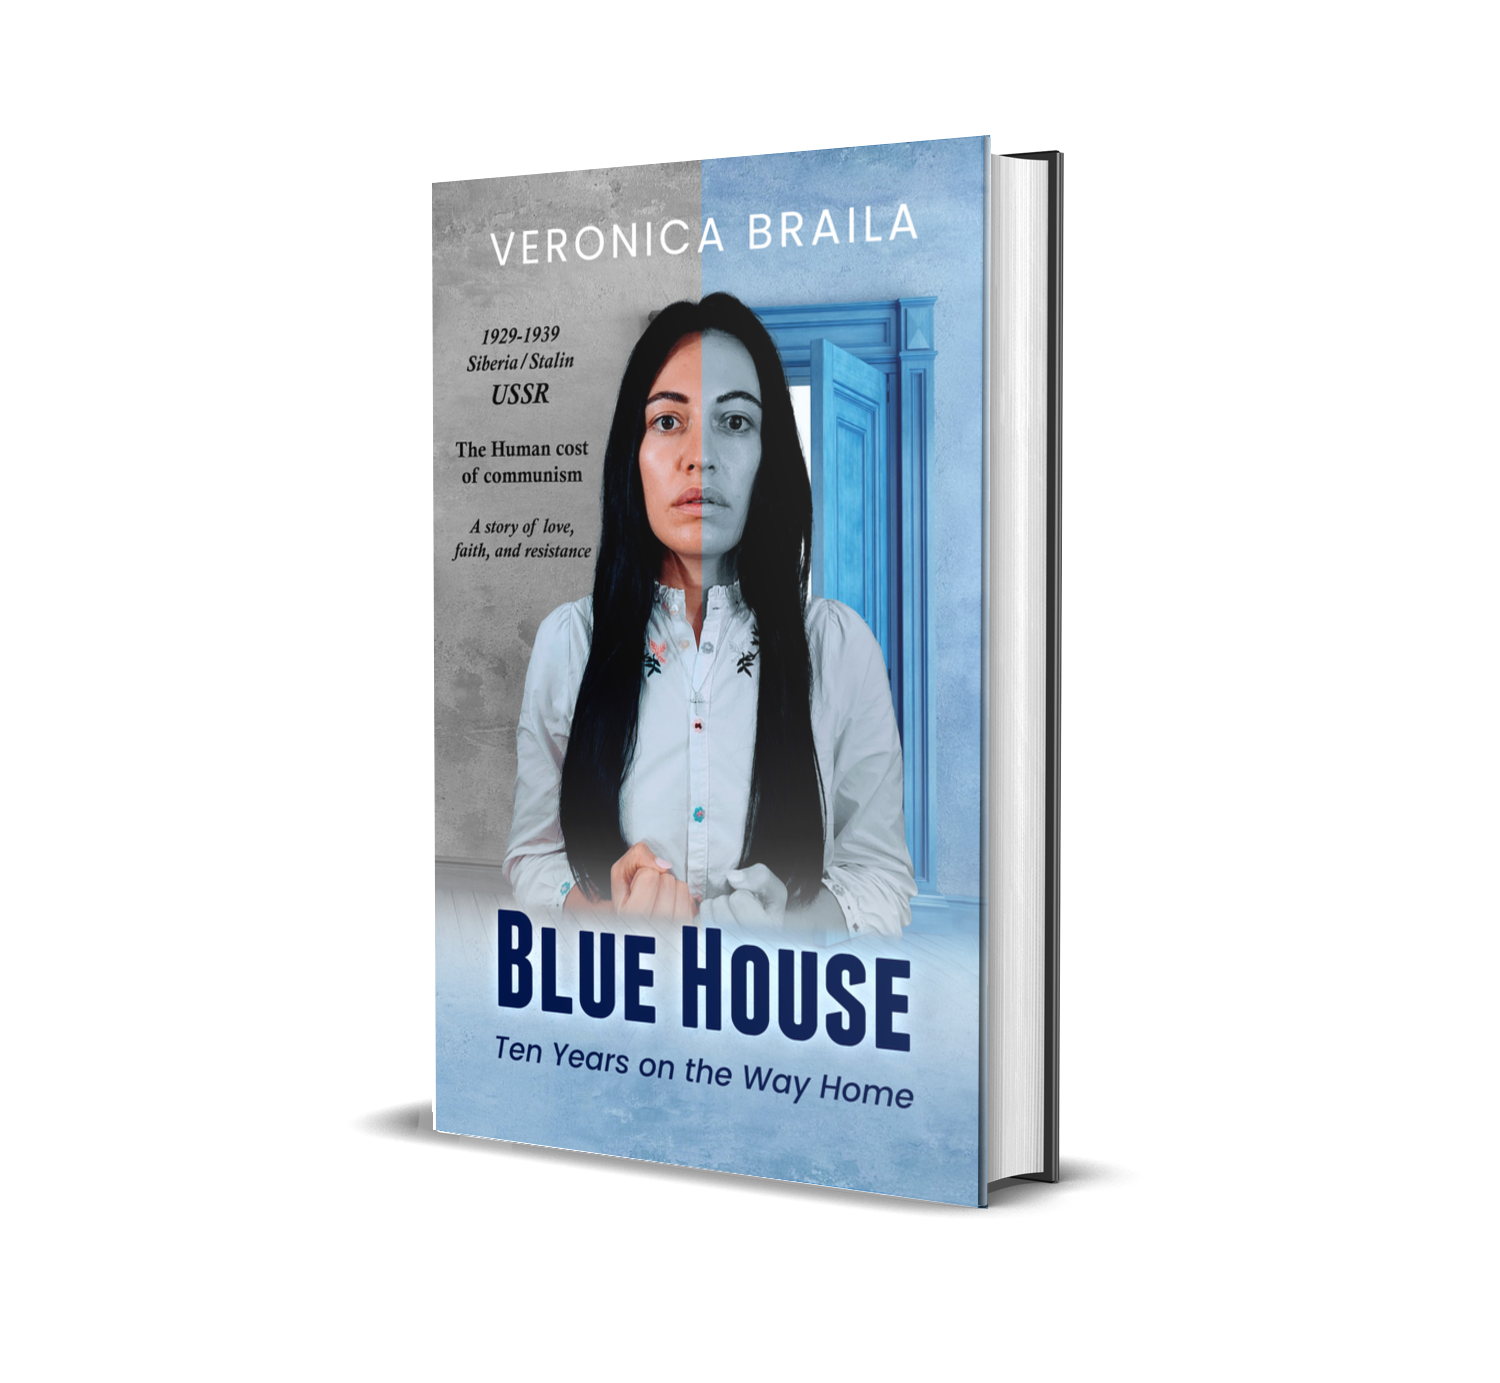 Blue House: Ten Years on the Way Home by Veronica Braila